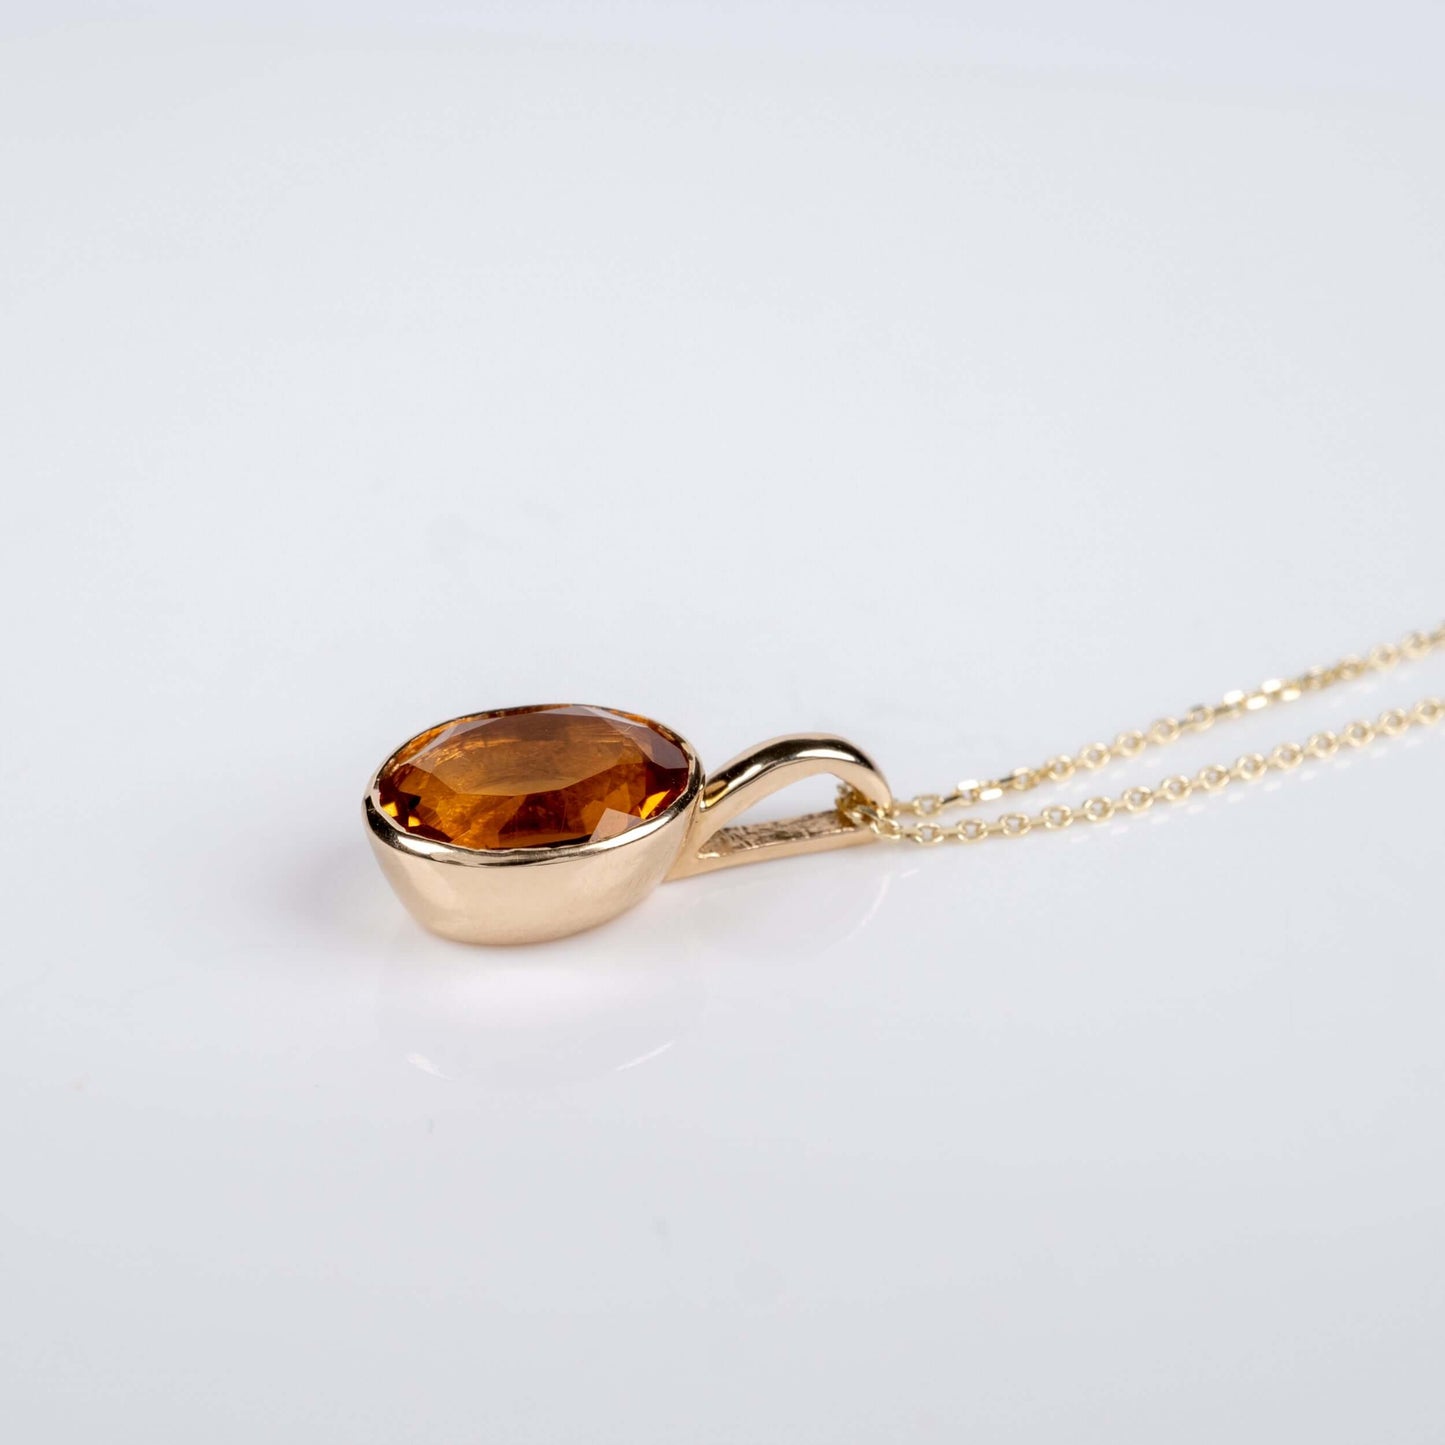 Citrine Pendant 14Ct Solid Gold Women's Necklace + Extendable Chain - Hunters Fine Jewellery